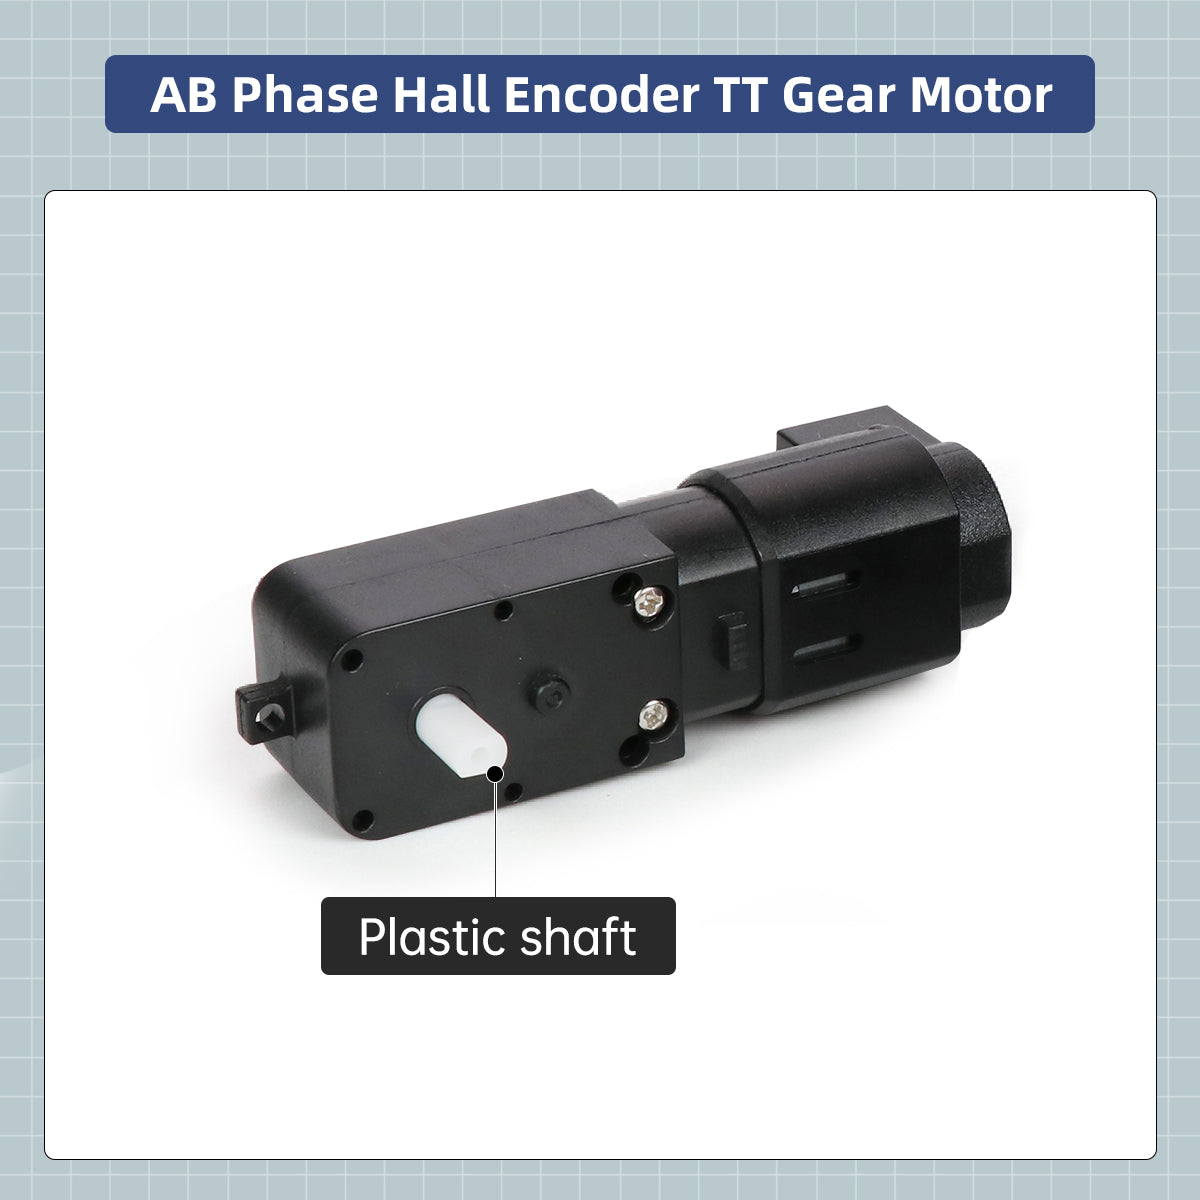 Hiwonder DC Motor TT Geared Motor Plastic Axis with AB Phase Encoder